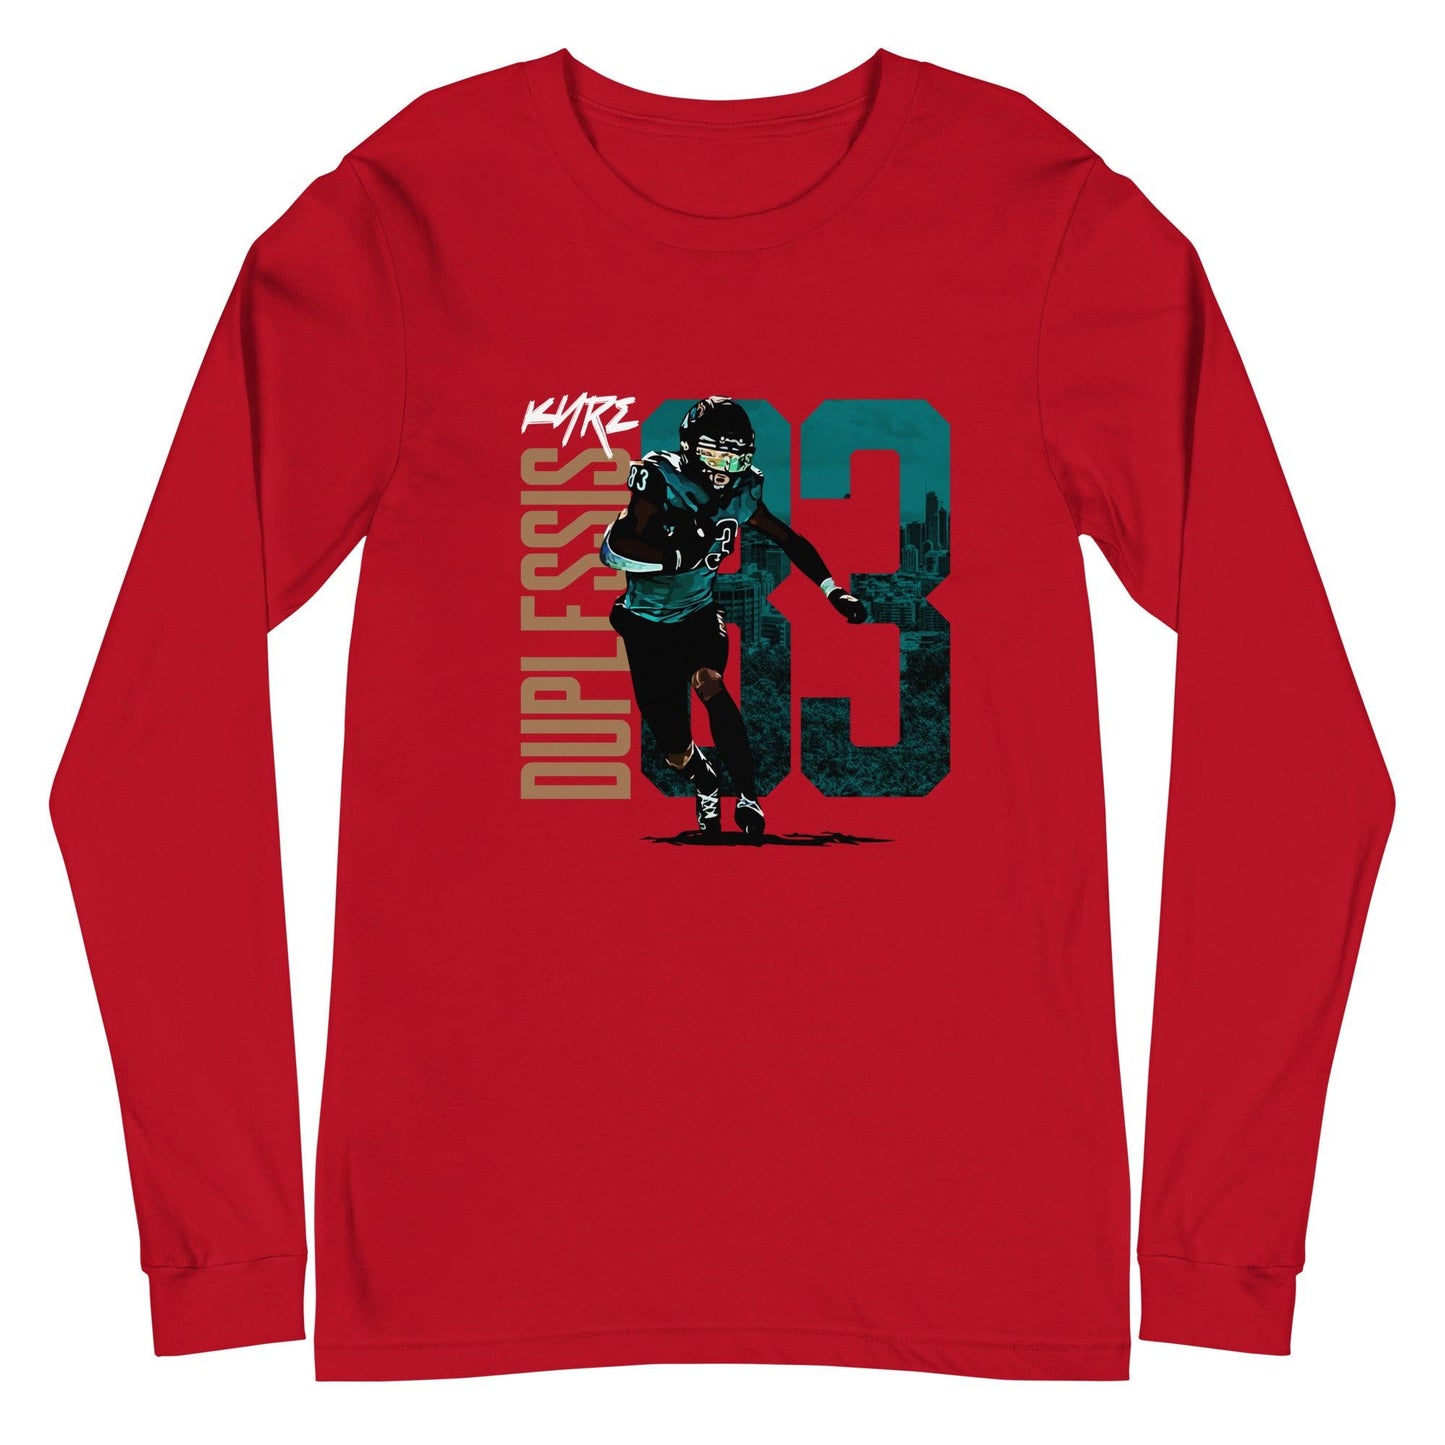 Kyre Duplessis "Gameday" Long Sleeve Tee - Fan Arch